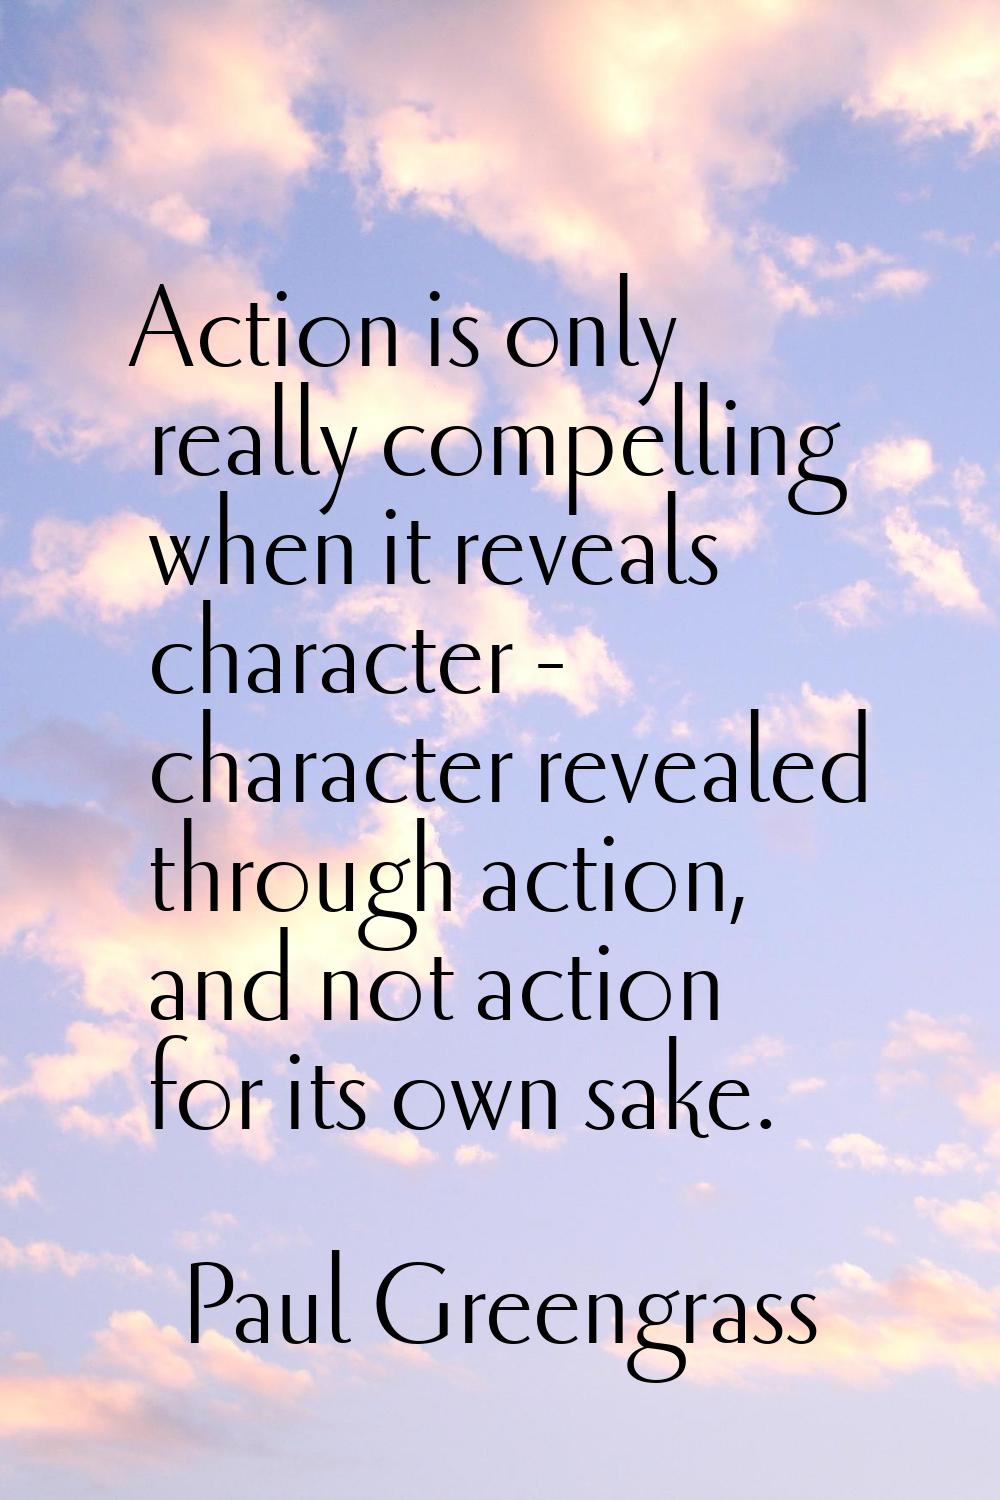 Action is only really compelling when it reveals character - character revealed through action, and